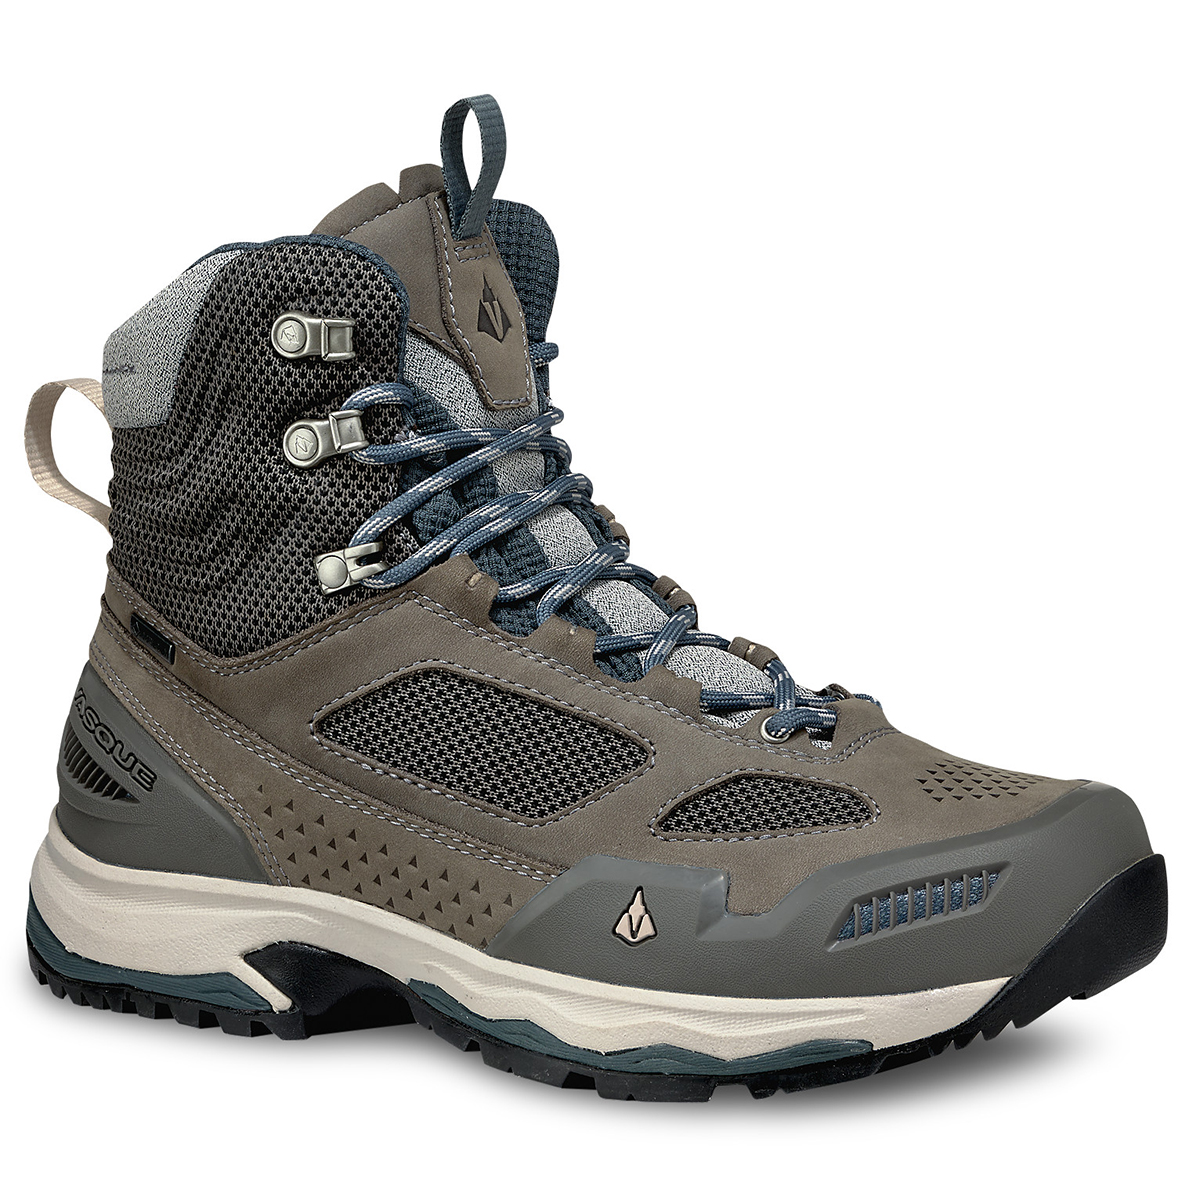 Buy > size 10 hiking boots > in stock